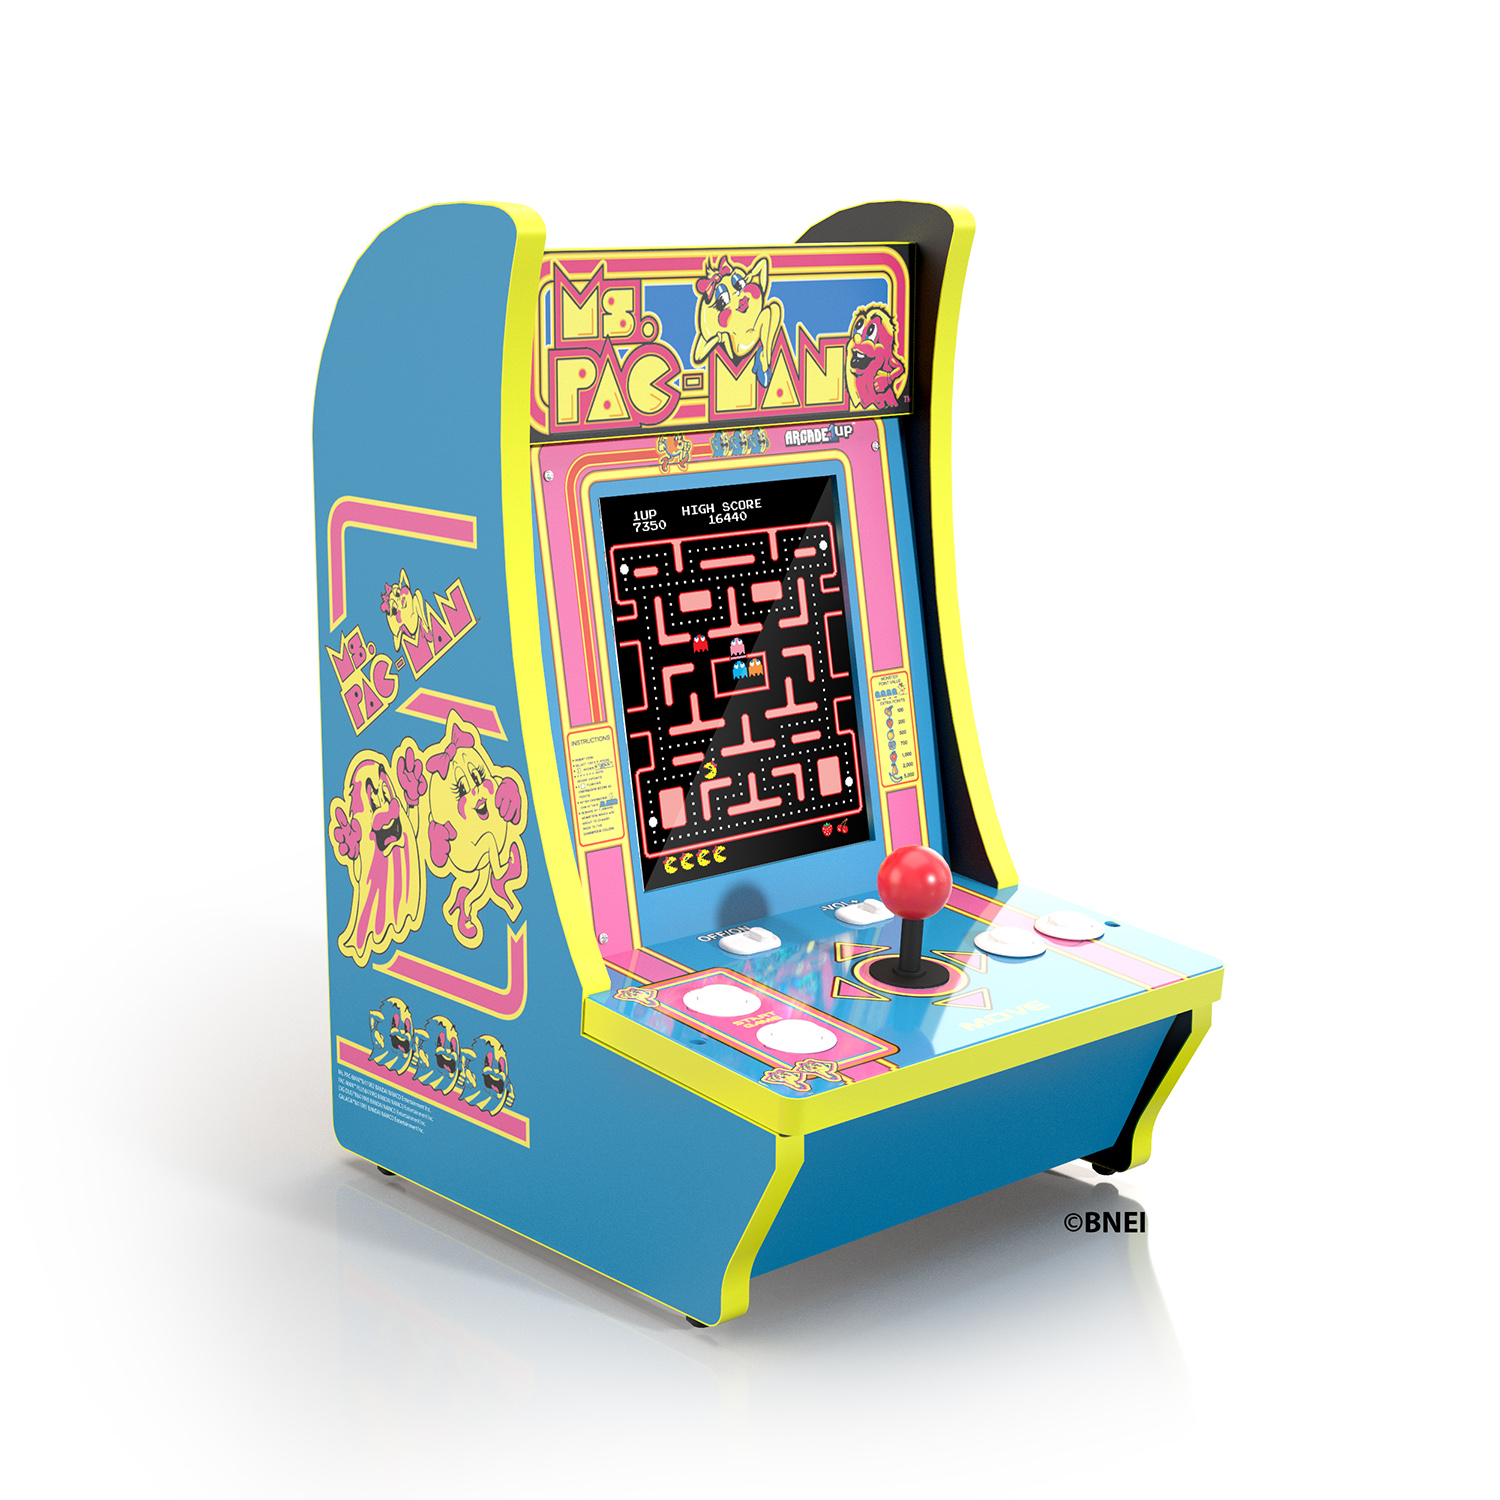 Ms. PAC-MAN Counter-cade, 4 Games in 1, Arcade1UP - image 1 of 7